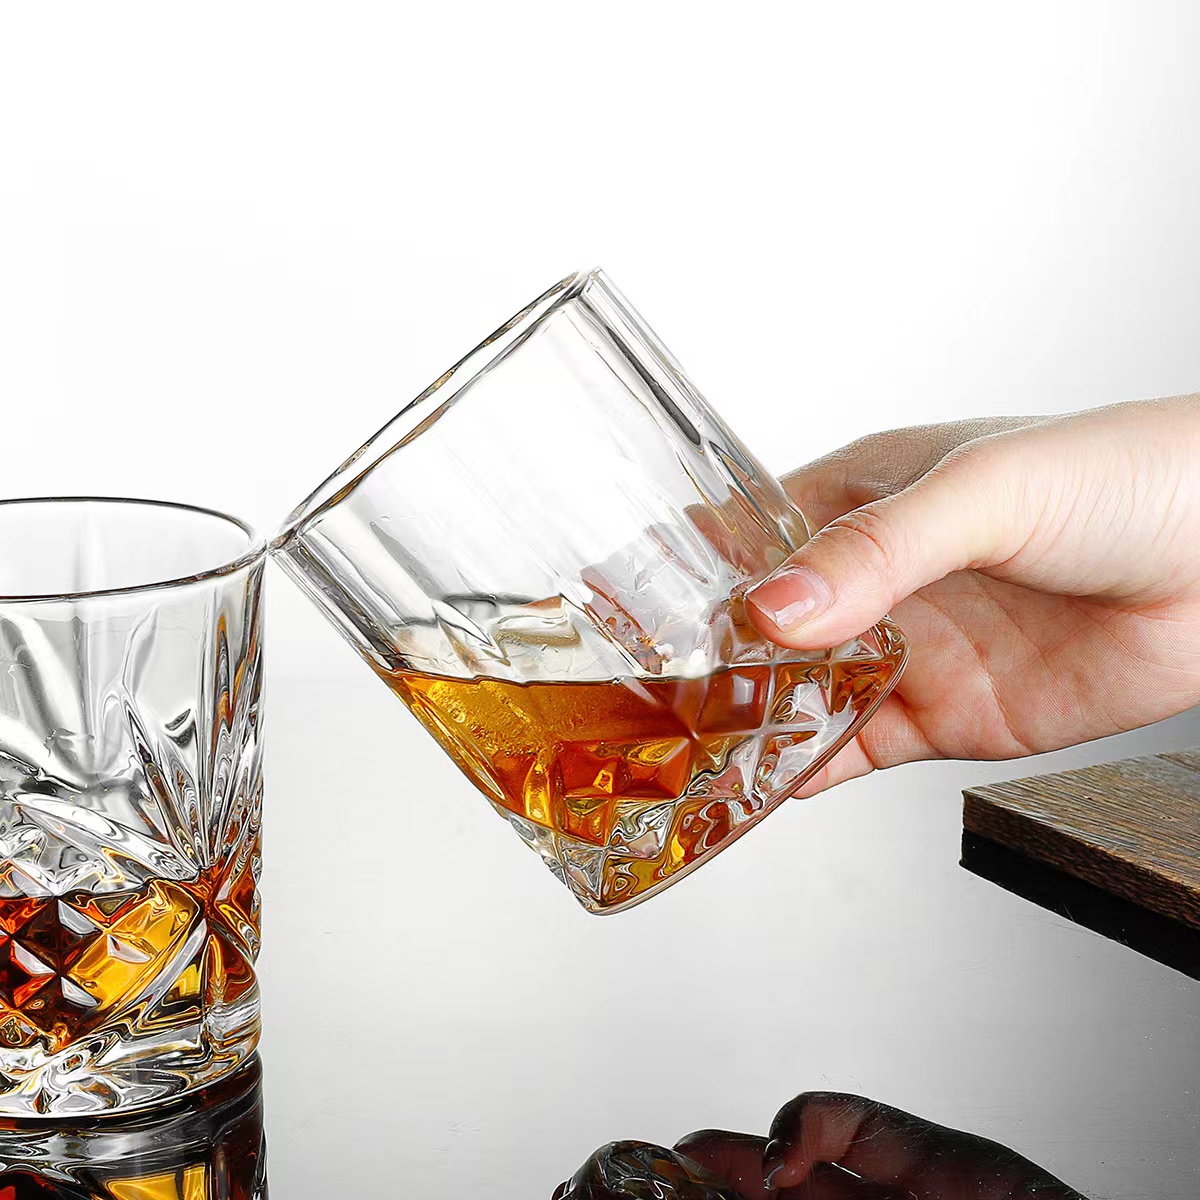 Old Fashioned Whiskey Glasses For Scotch, Bourbon, Liquor05 - 副本